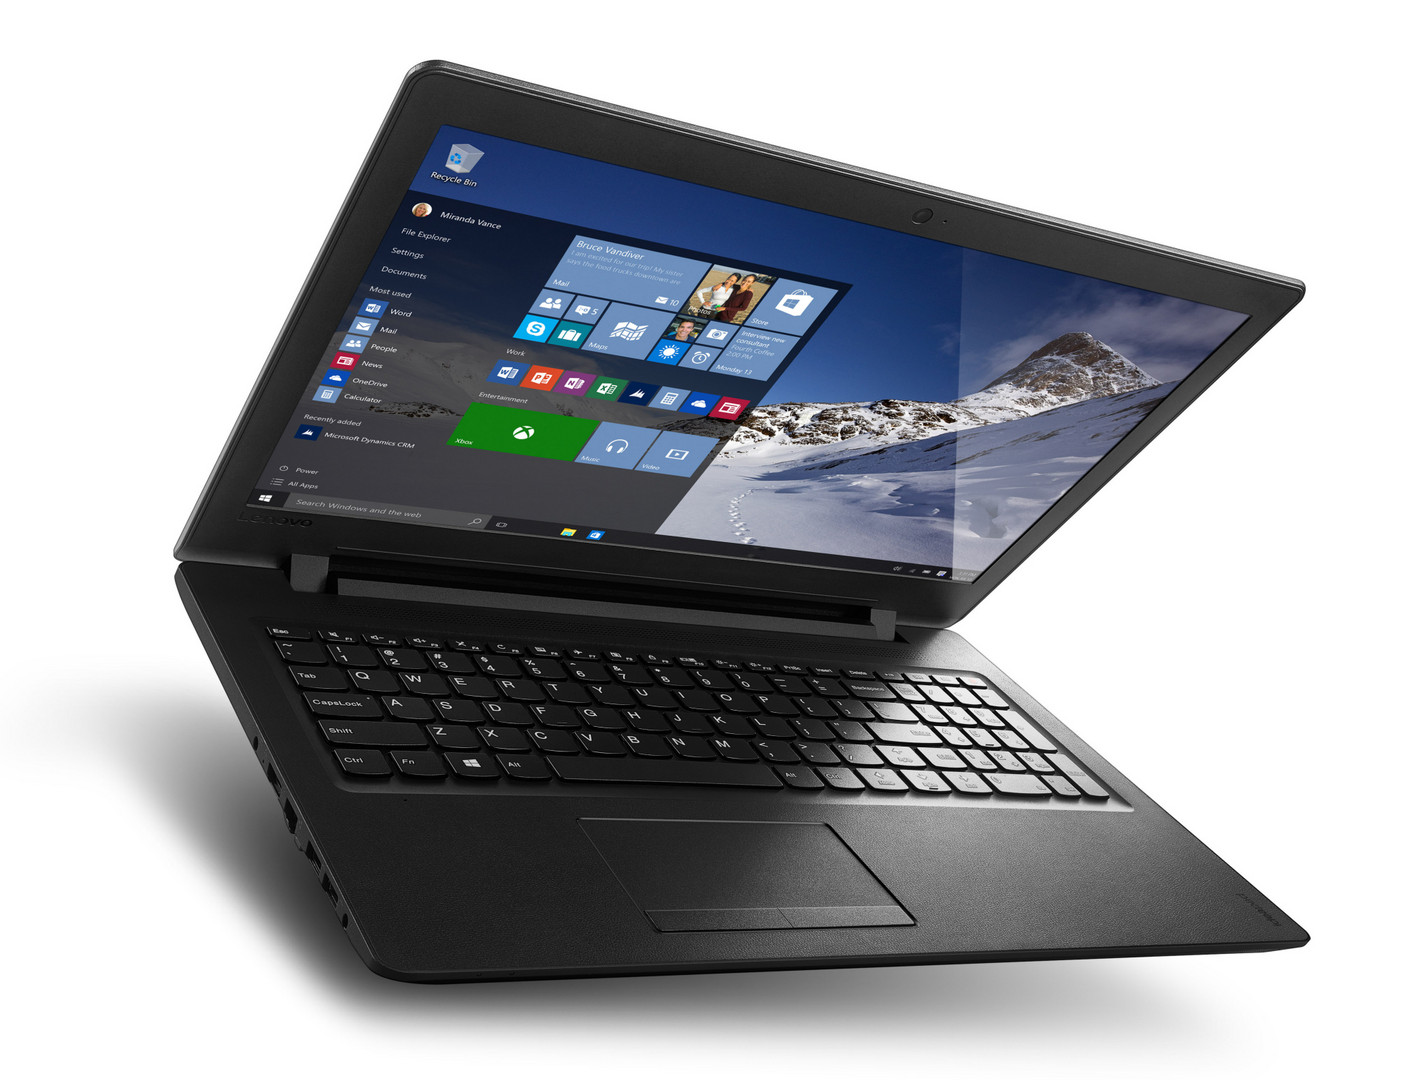 Lenovo IdeaPad 110-15ACL (A8-7410, HD) Laptop Review - NotebookCheck.net Reviews